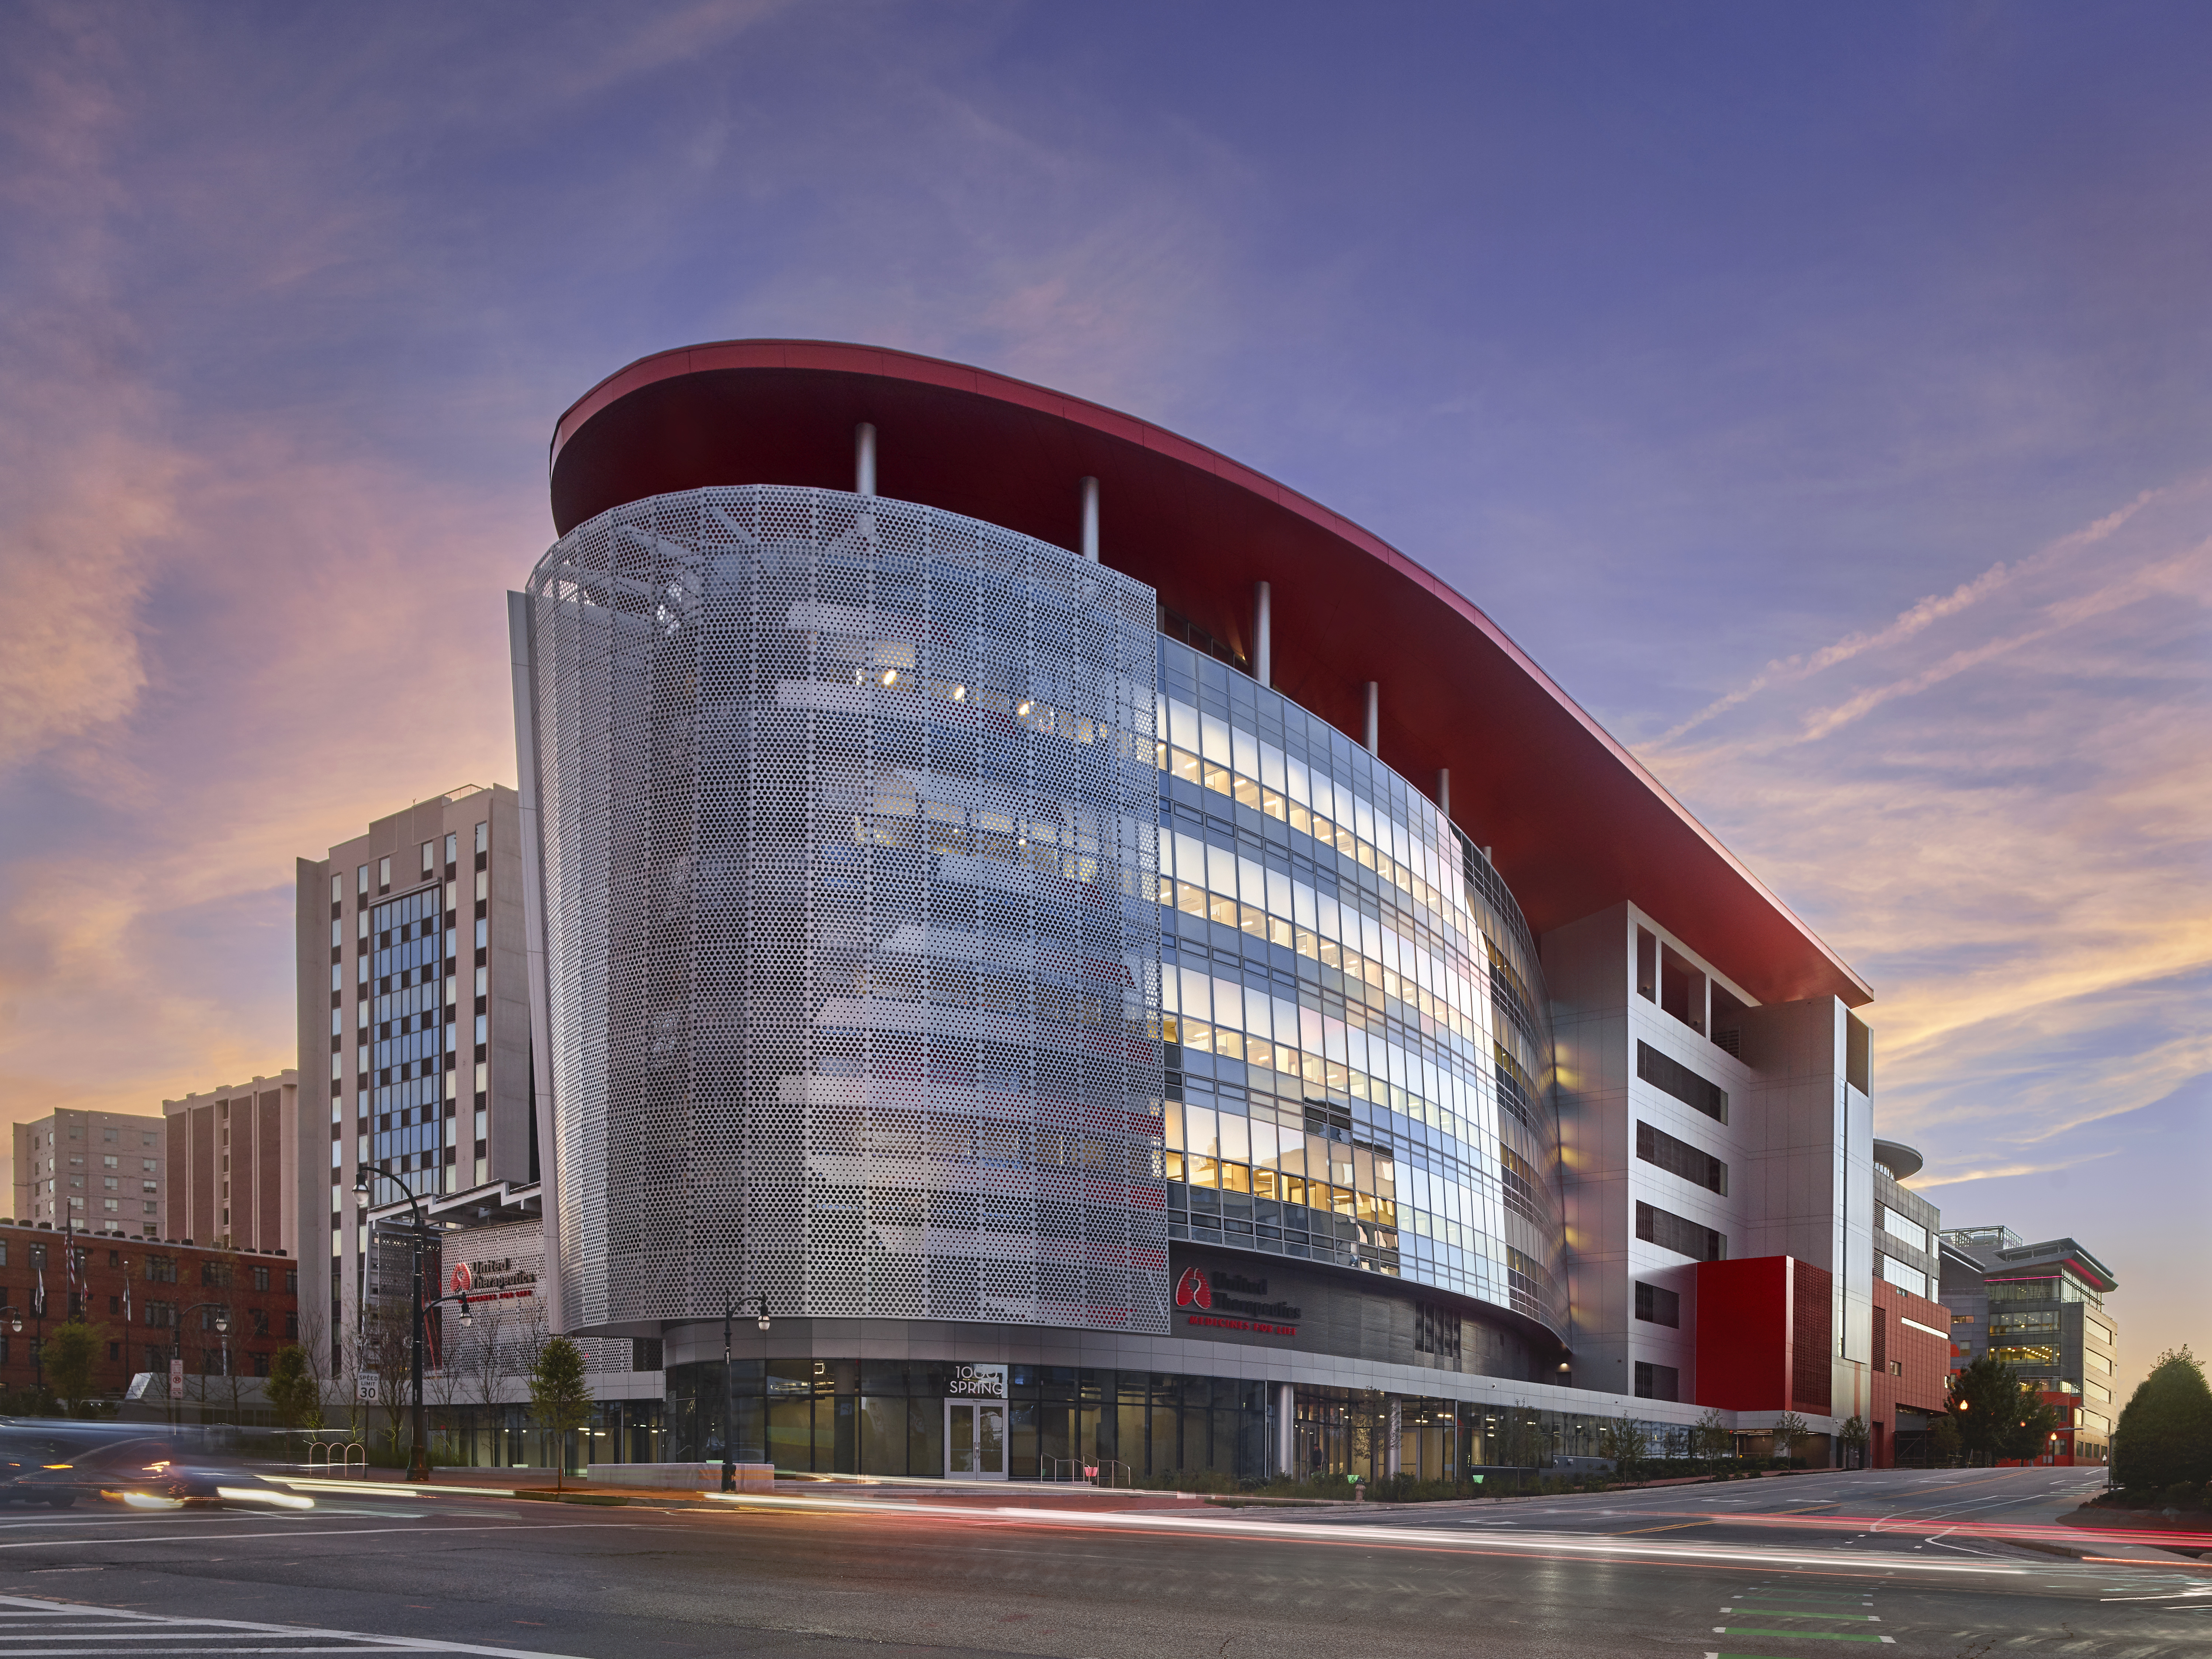 Exterior image of the United Therapeutics Unisphere project in Silver Spring, MD.